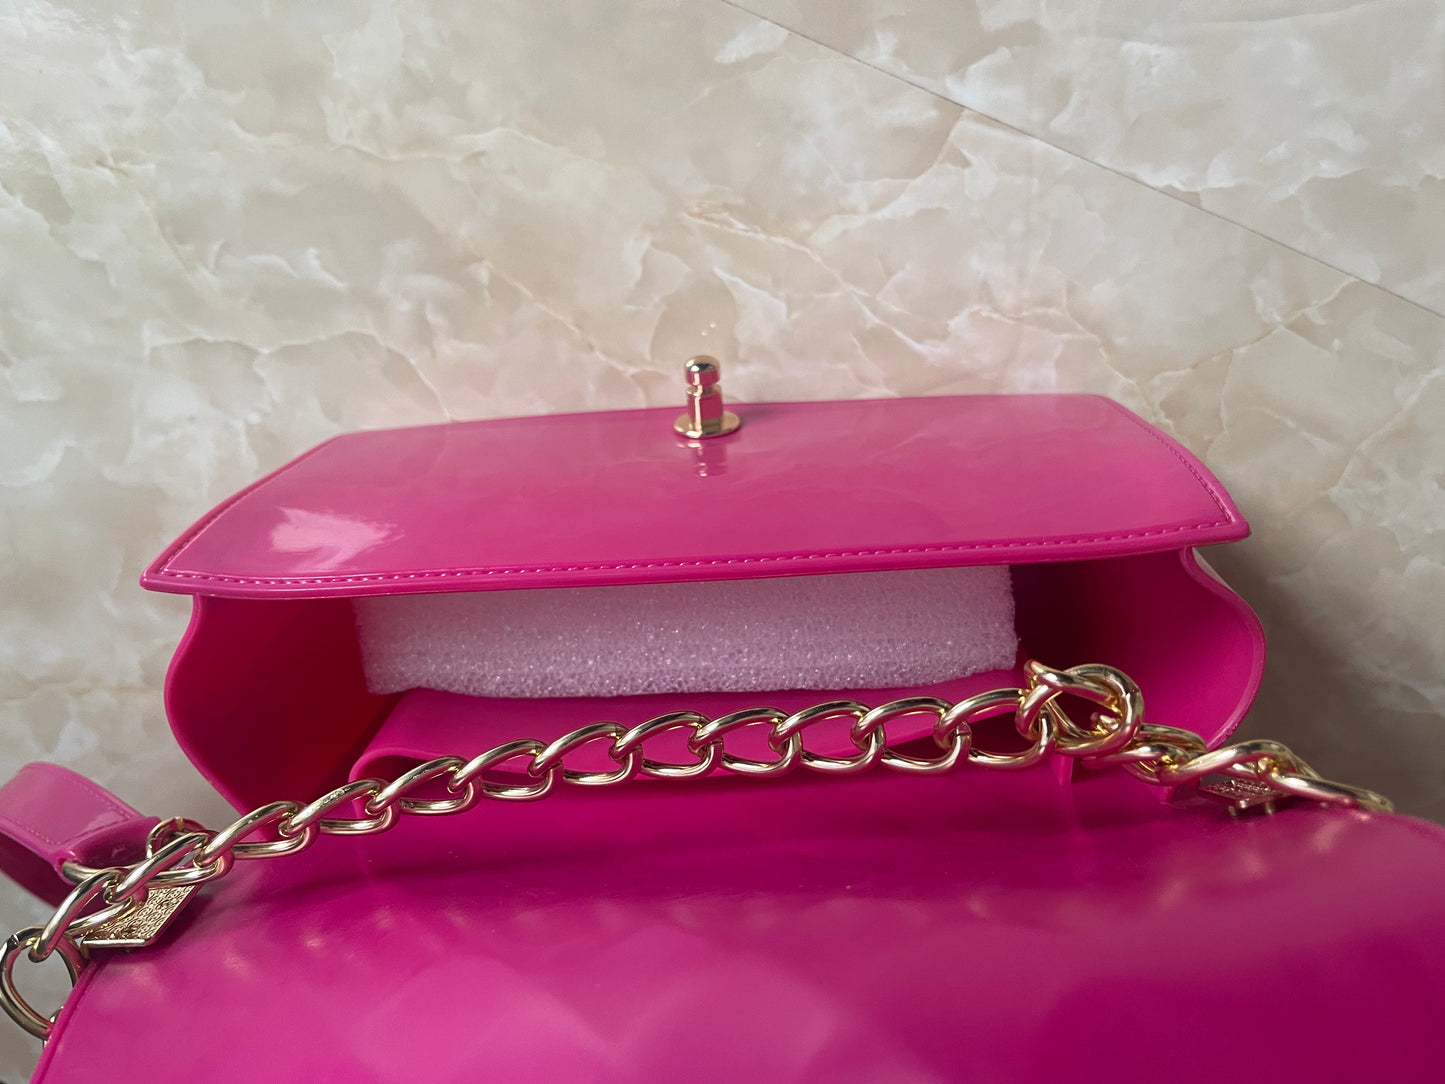 Pink jelly bag